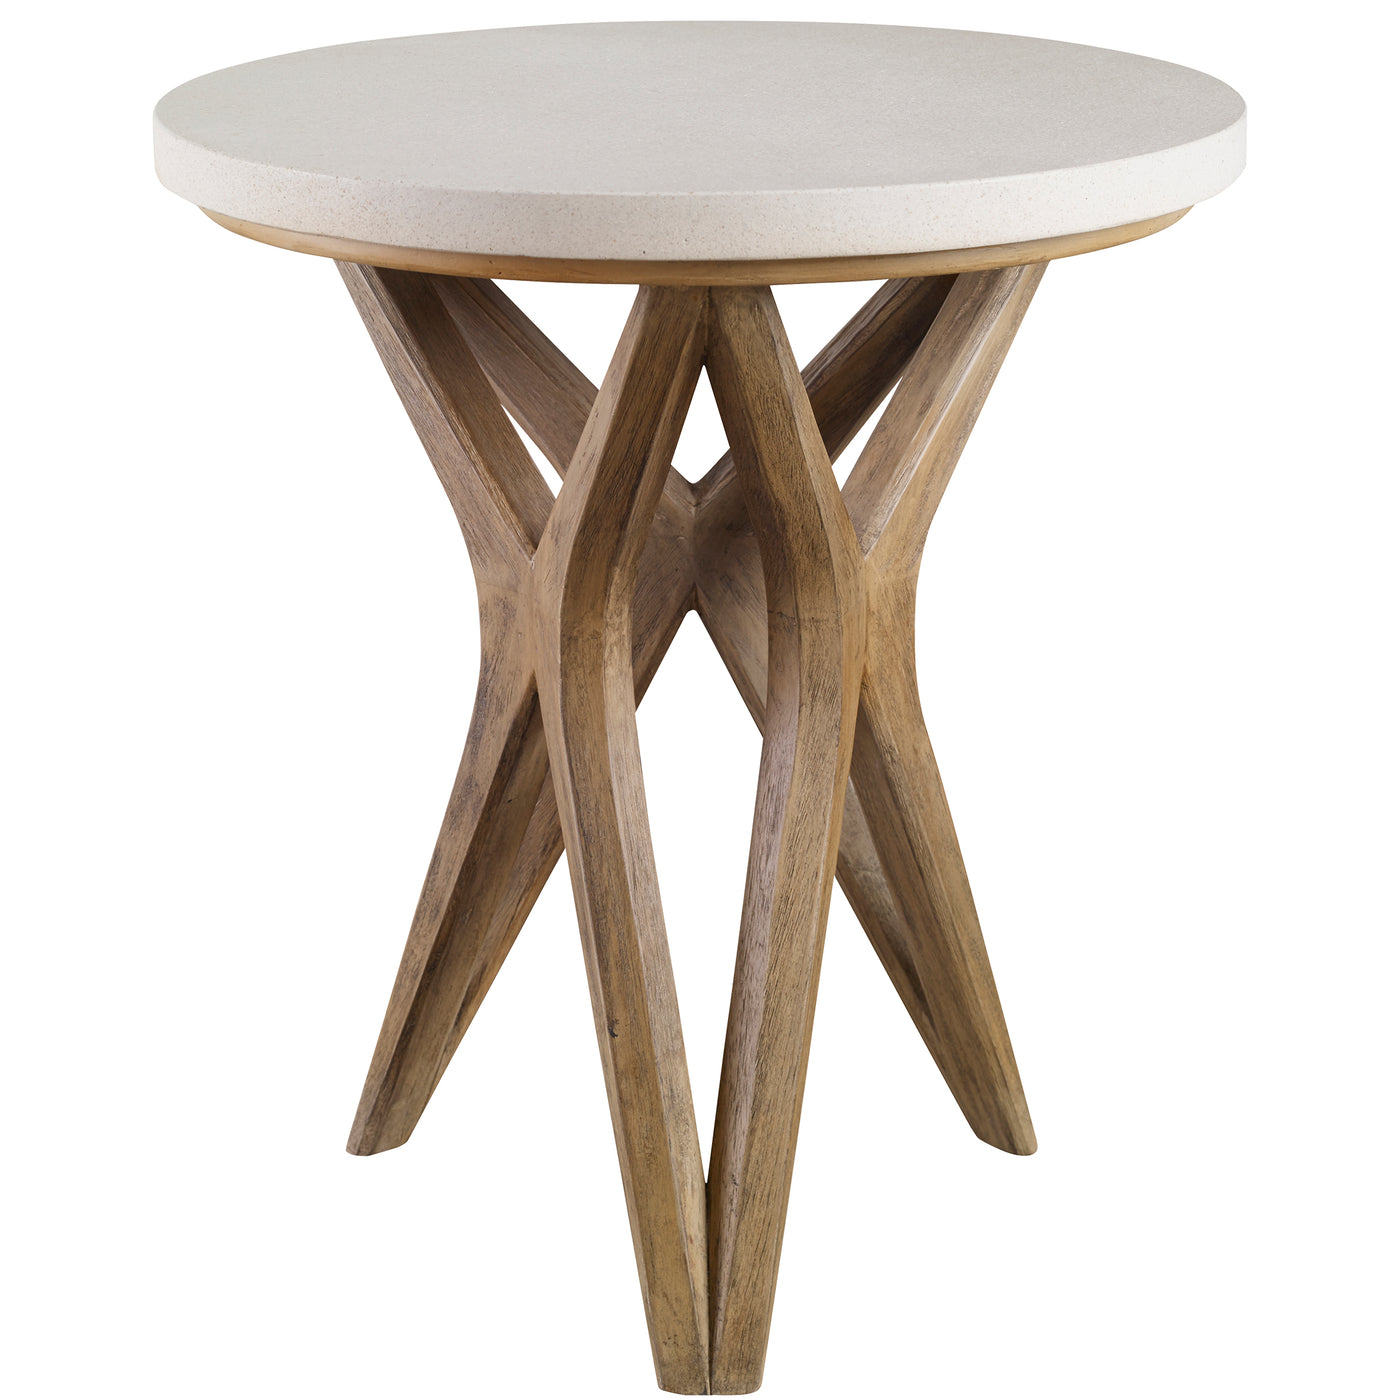 Handcrafted From Solid Mixed Woods With An Natural Ivory Limestone Top, On A Geometric Base Finished In A Warm Oatmeal Was...